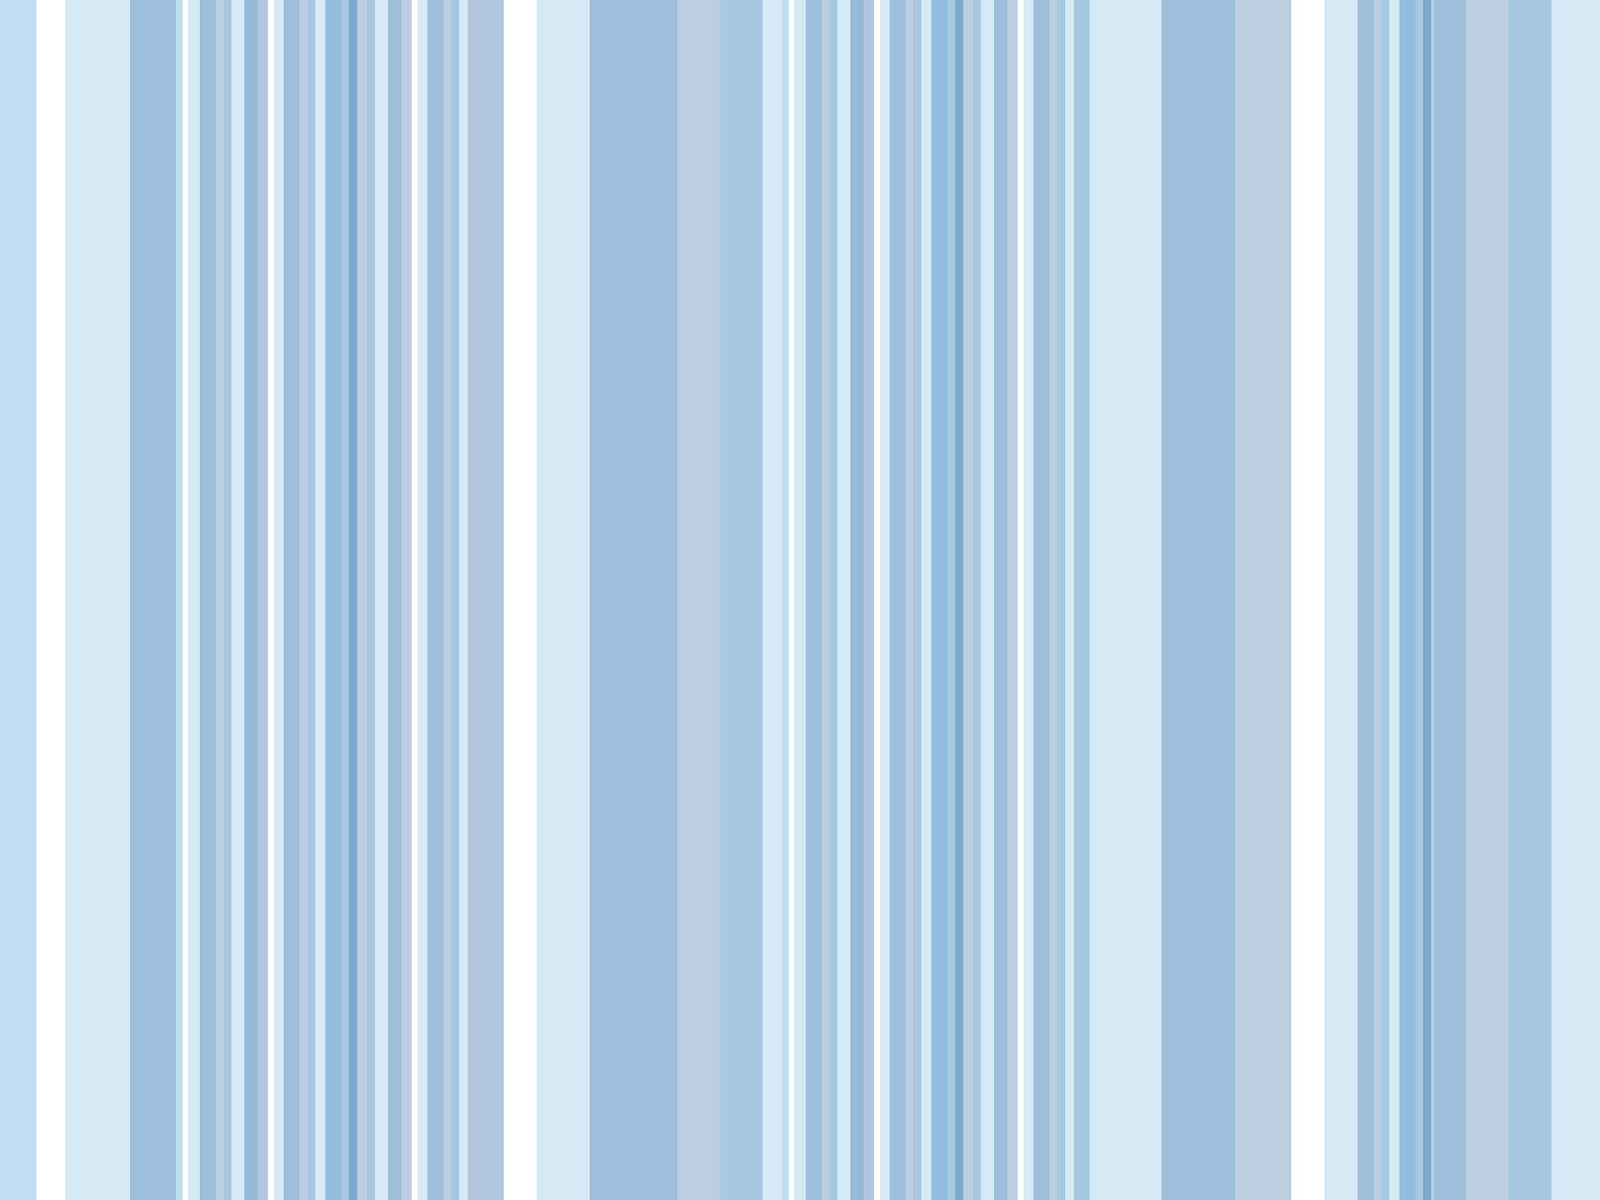 Background Wallpaper Image Baby Blue And White Vertical Stripes Car